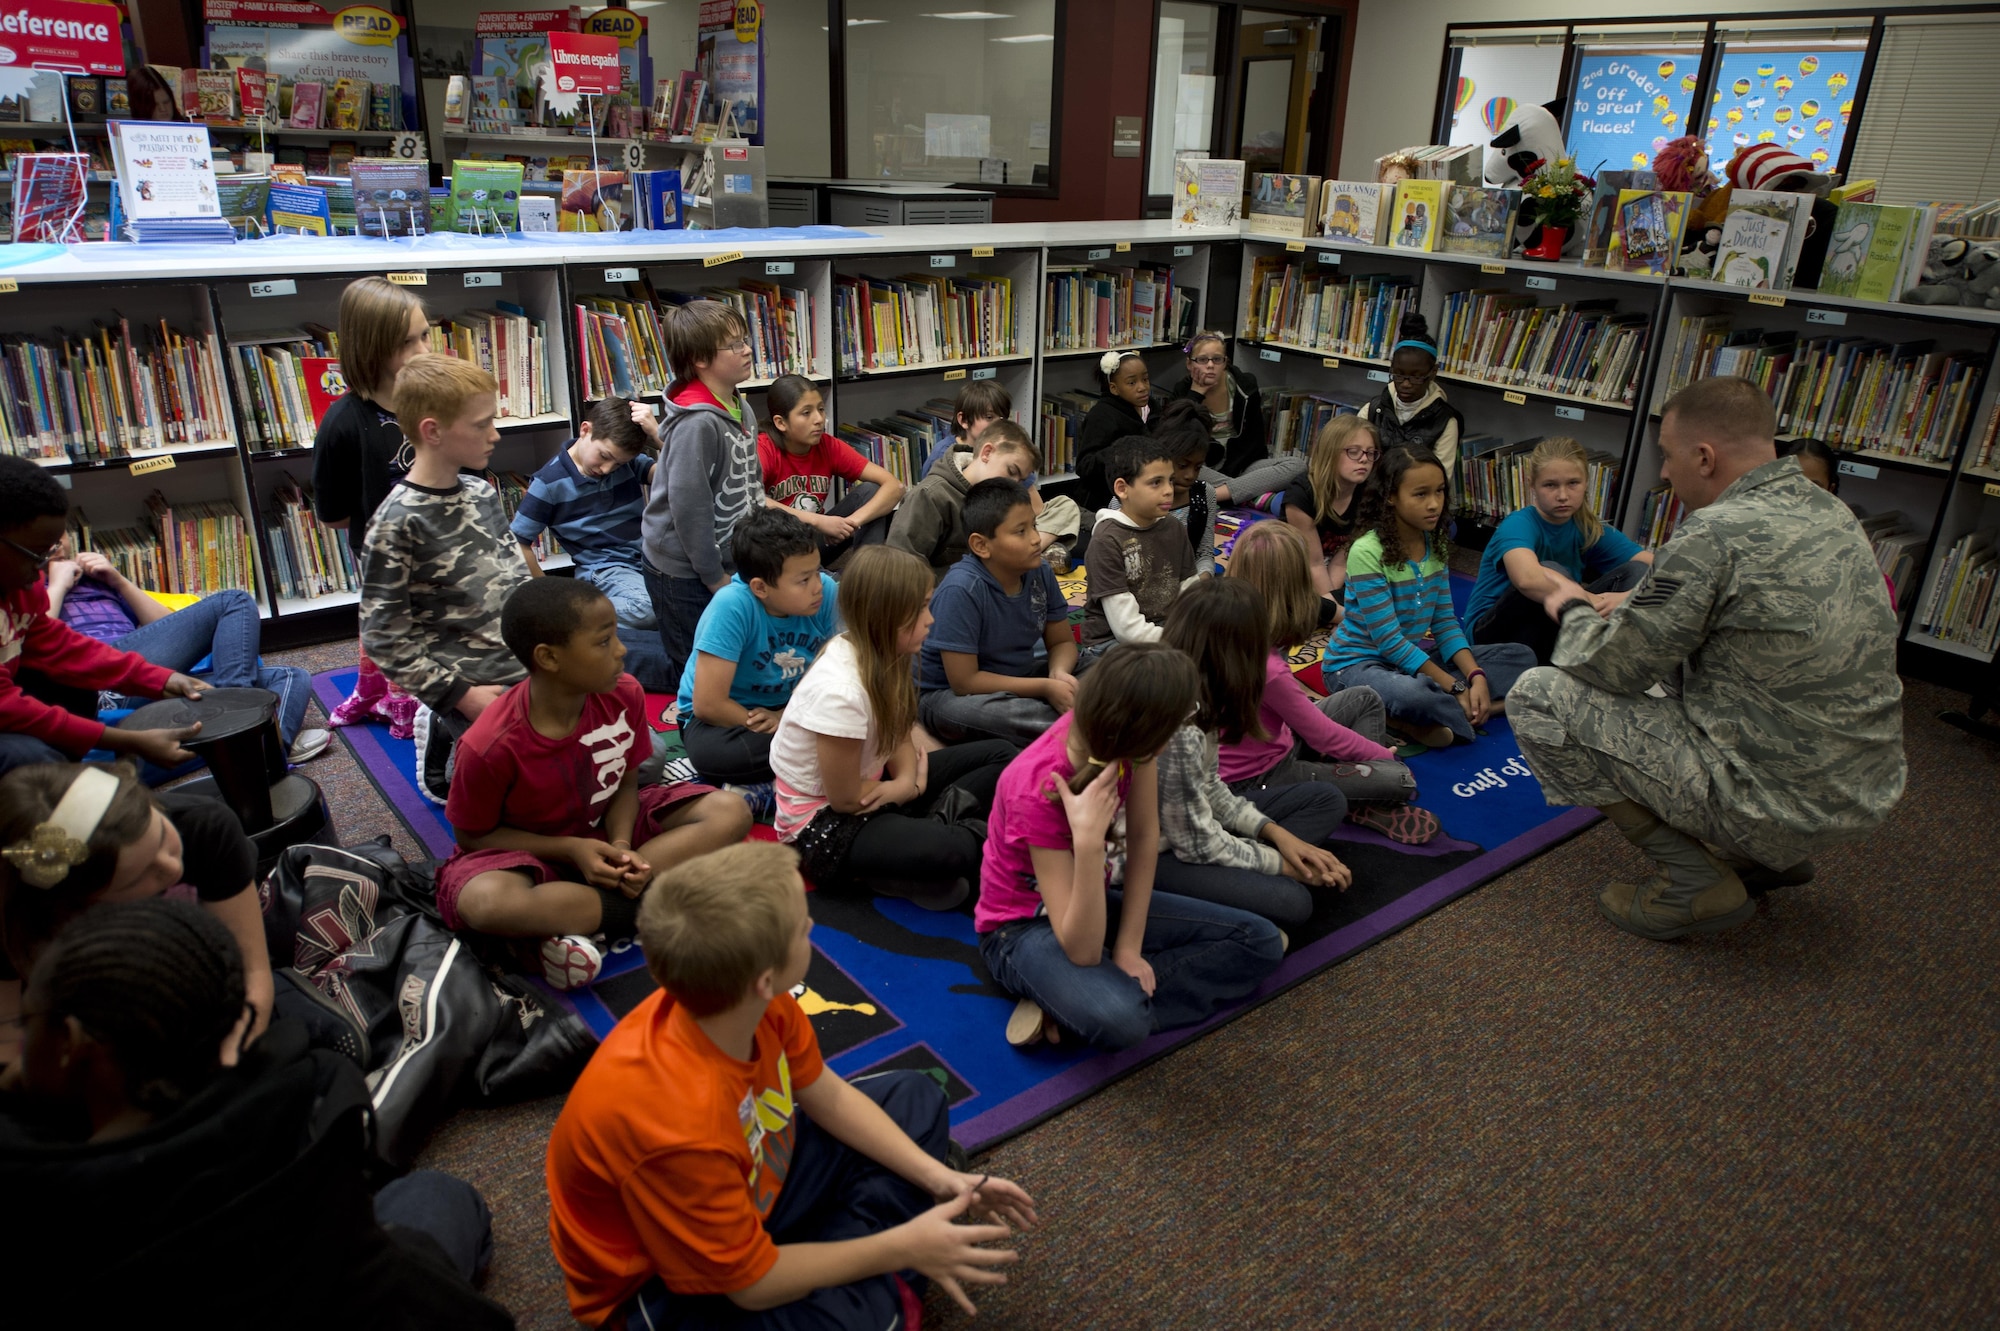 Tech. Sgt. Matthew Zien speaks to students for Veterans Day Nov. 13, 2013, at Cimarron Elementary in Aurora, Colo. Zien hit his lowest low when he nearly lost his life in 2012 to medical issues, and relapsed into post-traumatic stress syndrome. He uses public speaking engagements and mentoring sessions to inspire resiliency for both the public and the Airmen he works with. (U.S. Air Force photo/Airman 1st Class Zachary Vucic)
